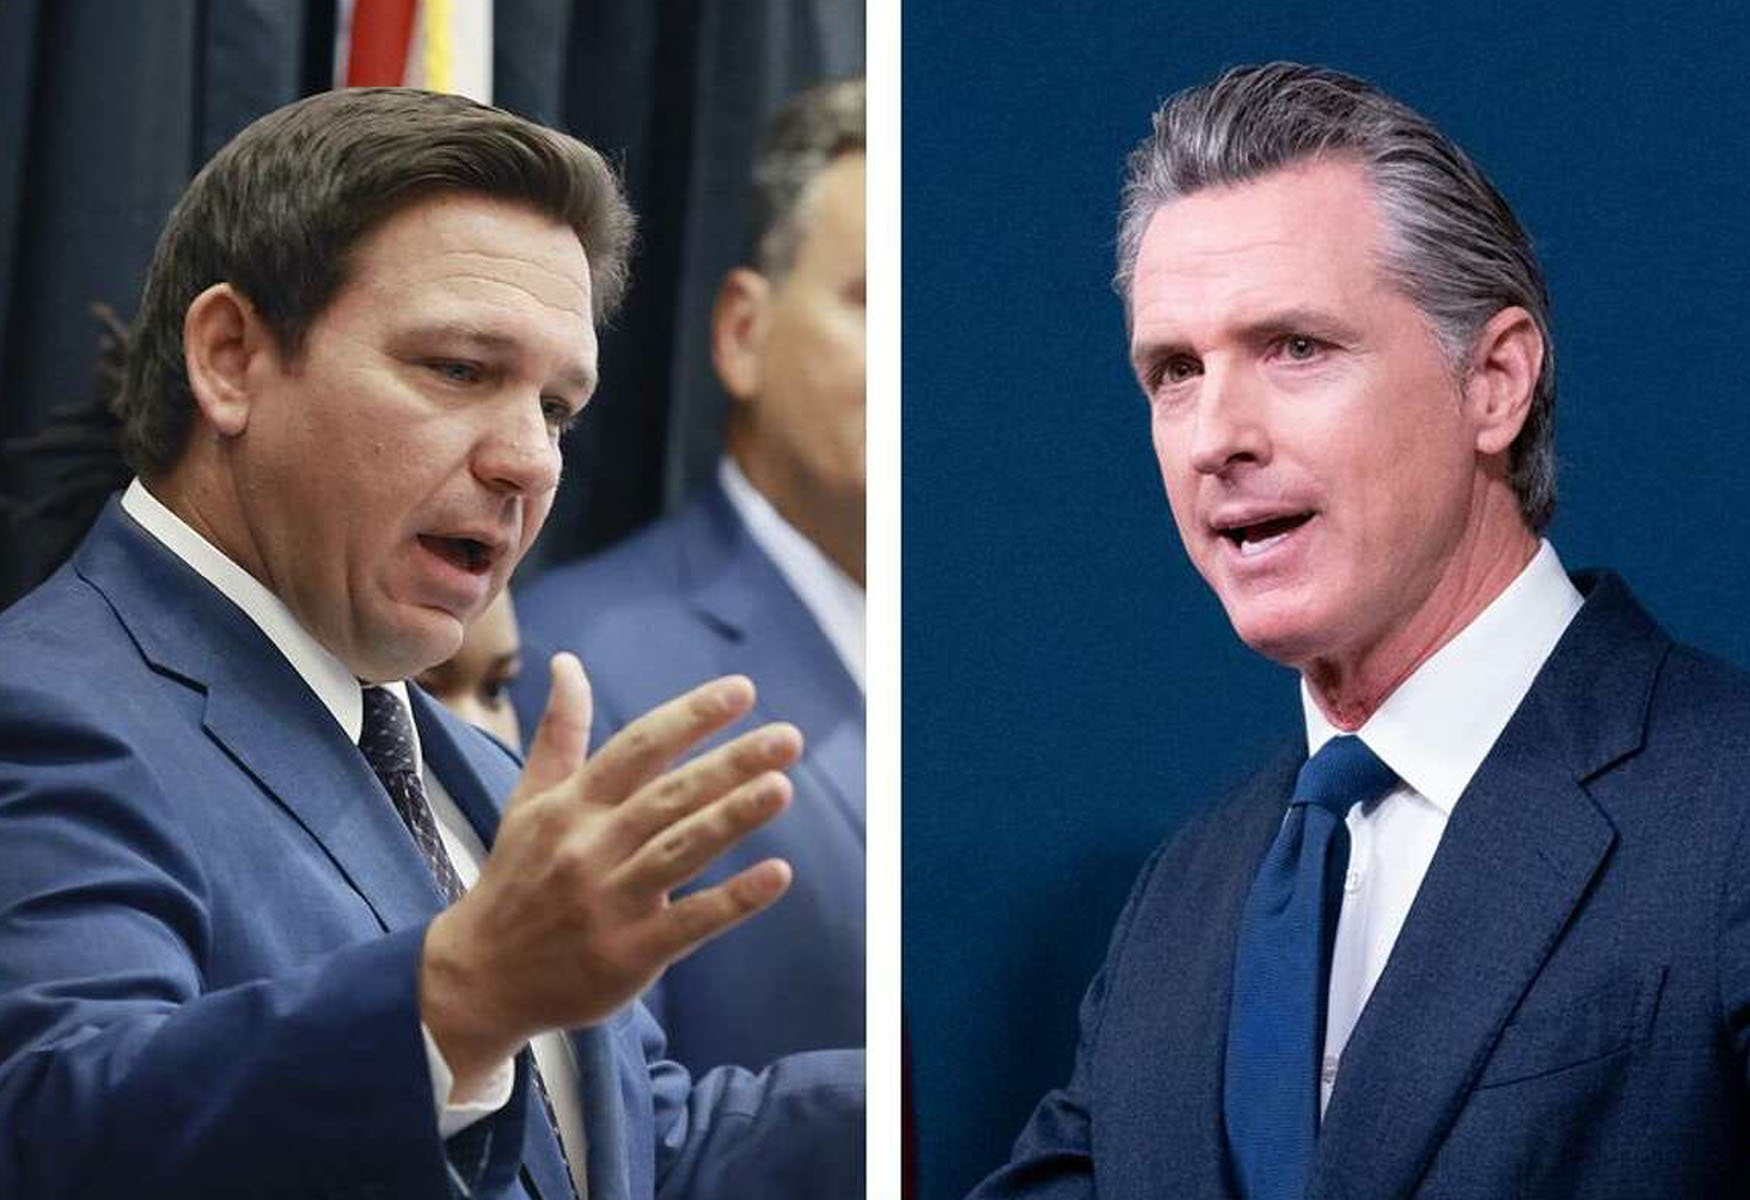 Ron DeSantis Sparks Controversy By Using Poop Photo To Attack Gavin Newsom In Fox News Debate